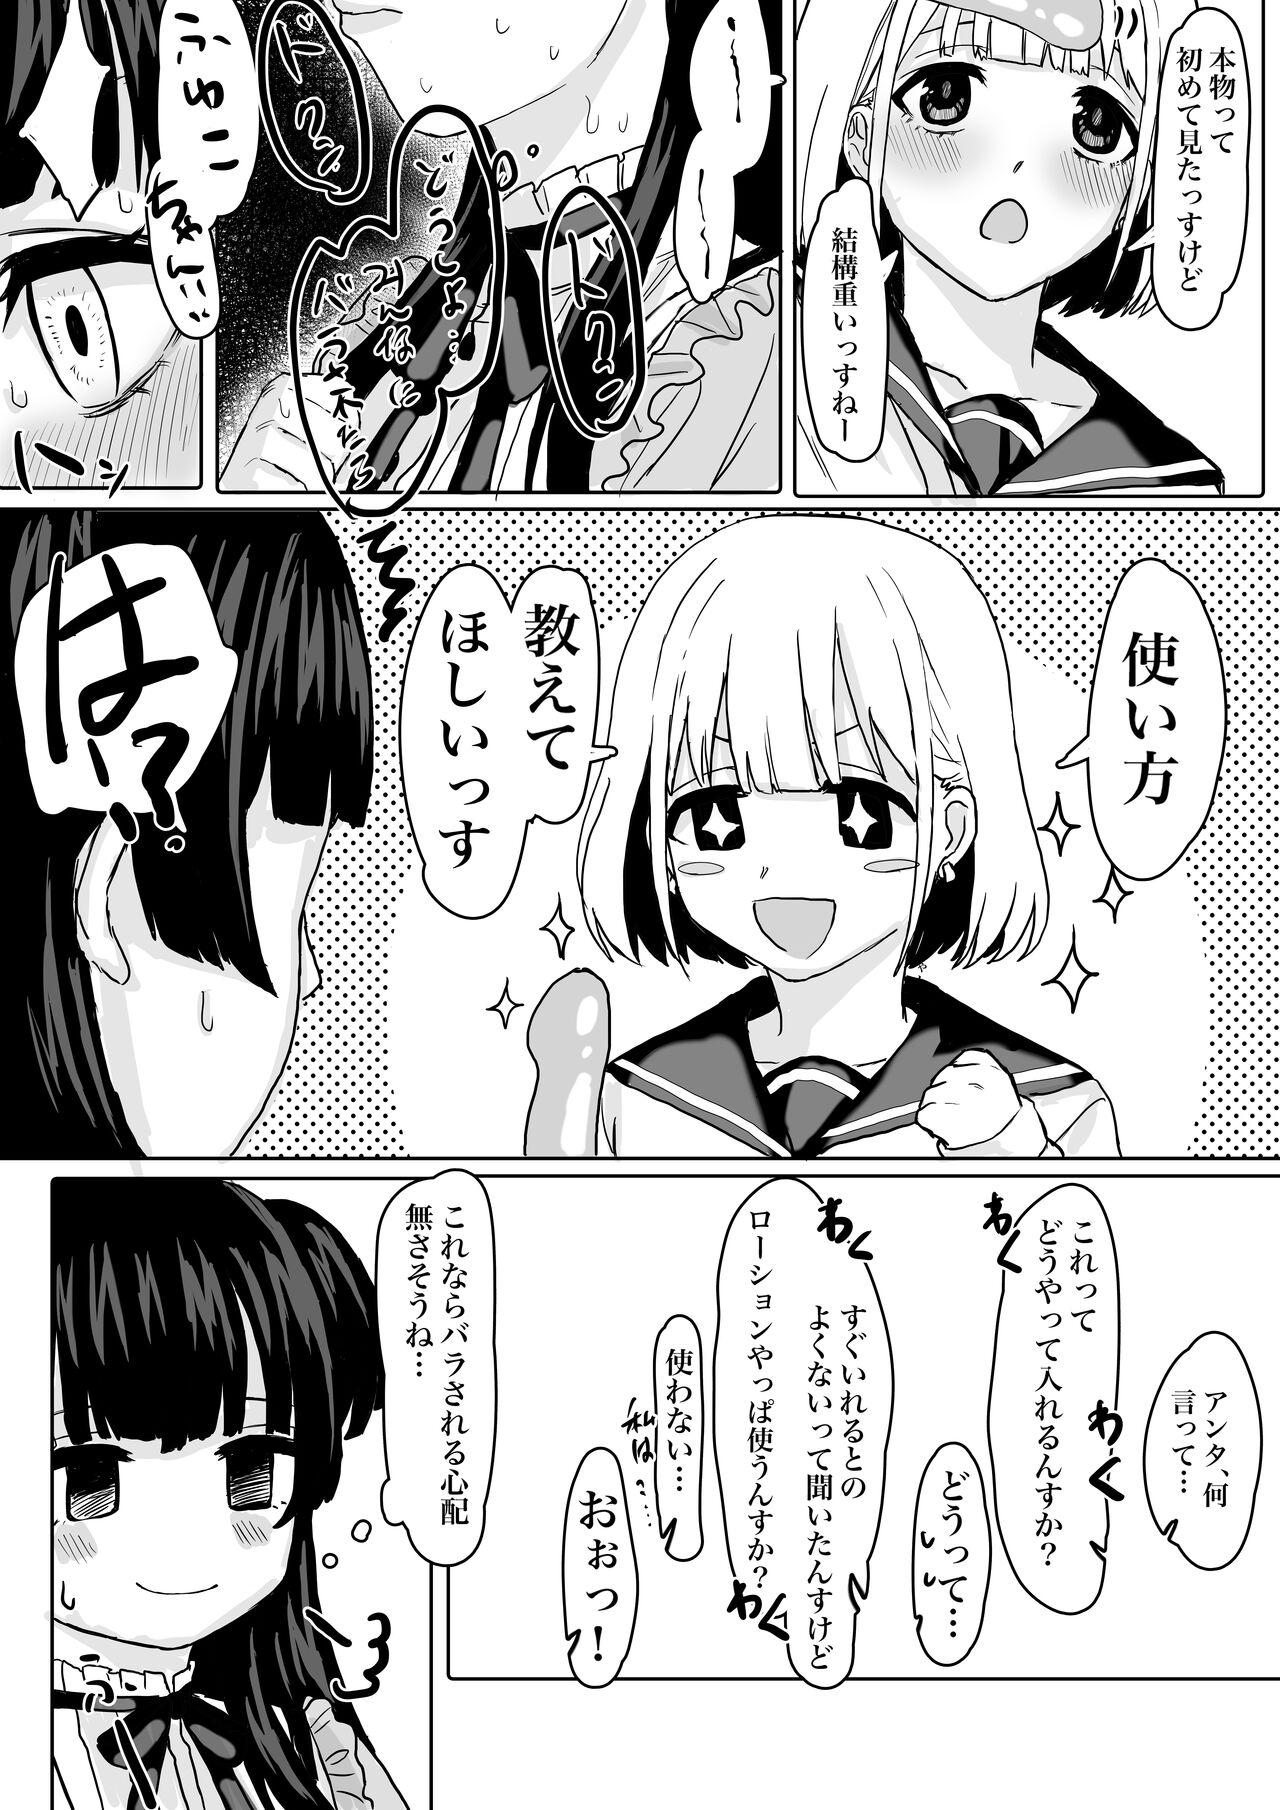 Hijab 「教えてほしいっす！」ふゆあさ百合 - The idolmaster Cousin - Page 4